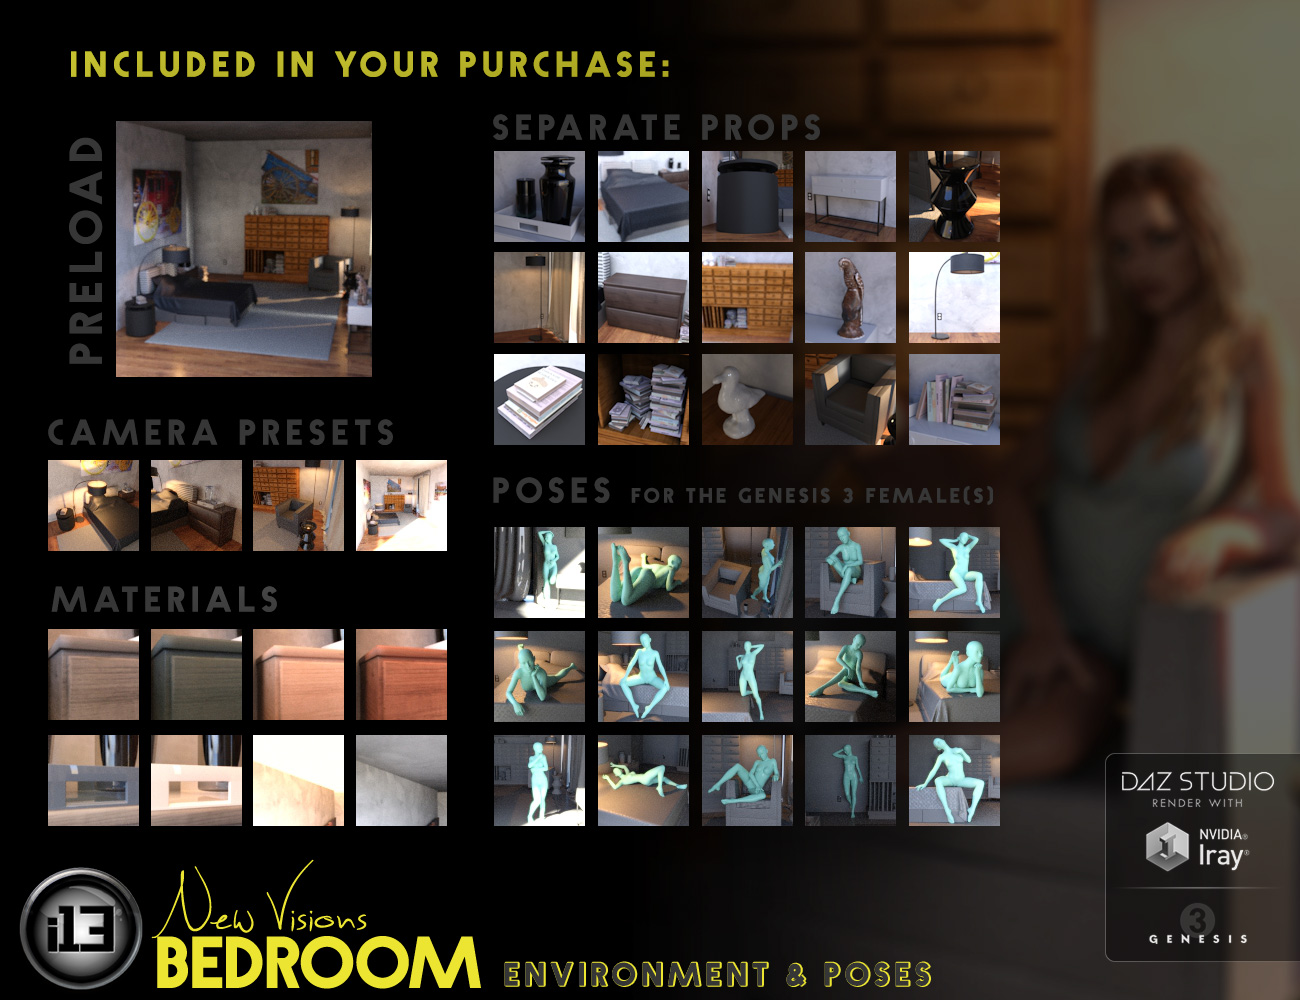 i13 New Visions Bedroom by: ironman13, 3D Models by Daz 3D